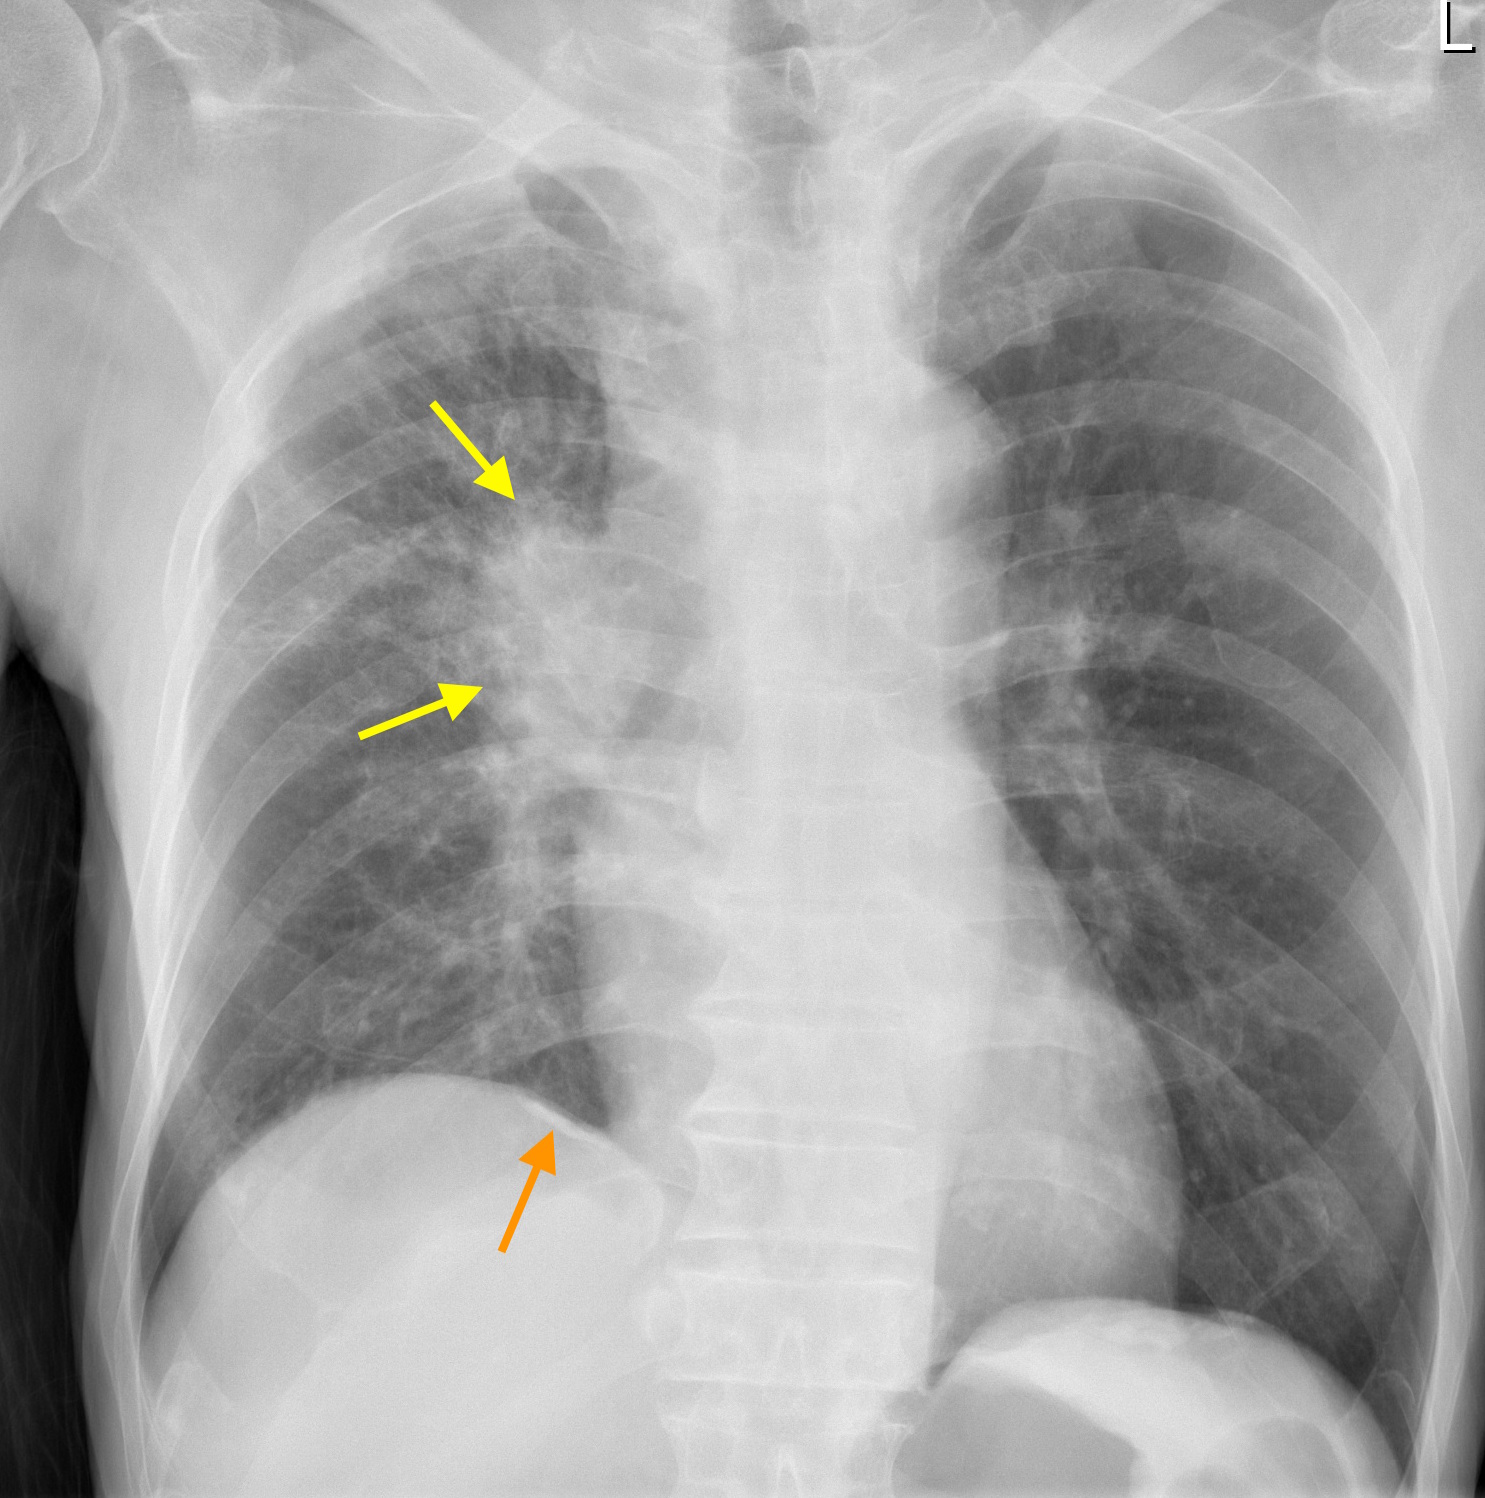 Lung cancer in patient with previous asbestos exposure - Radiology at